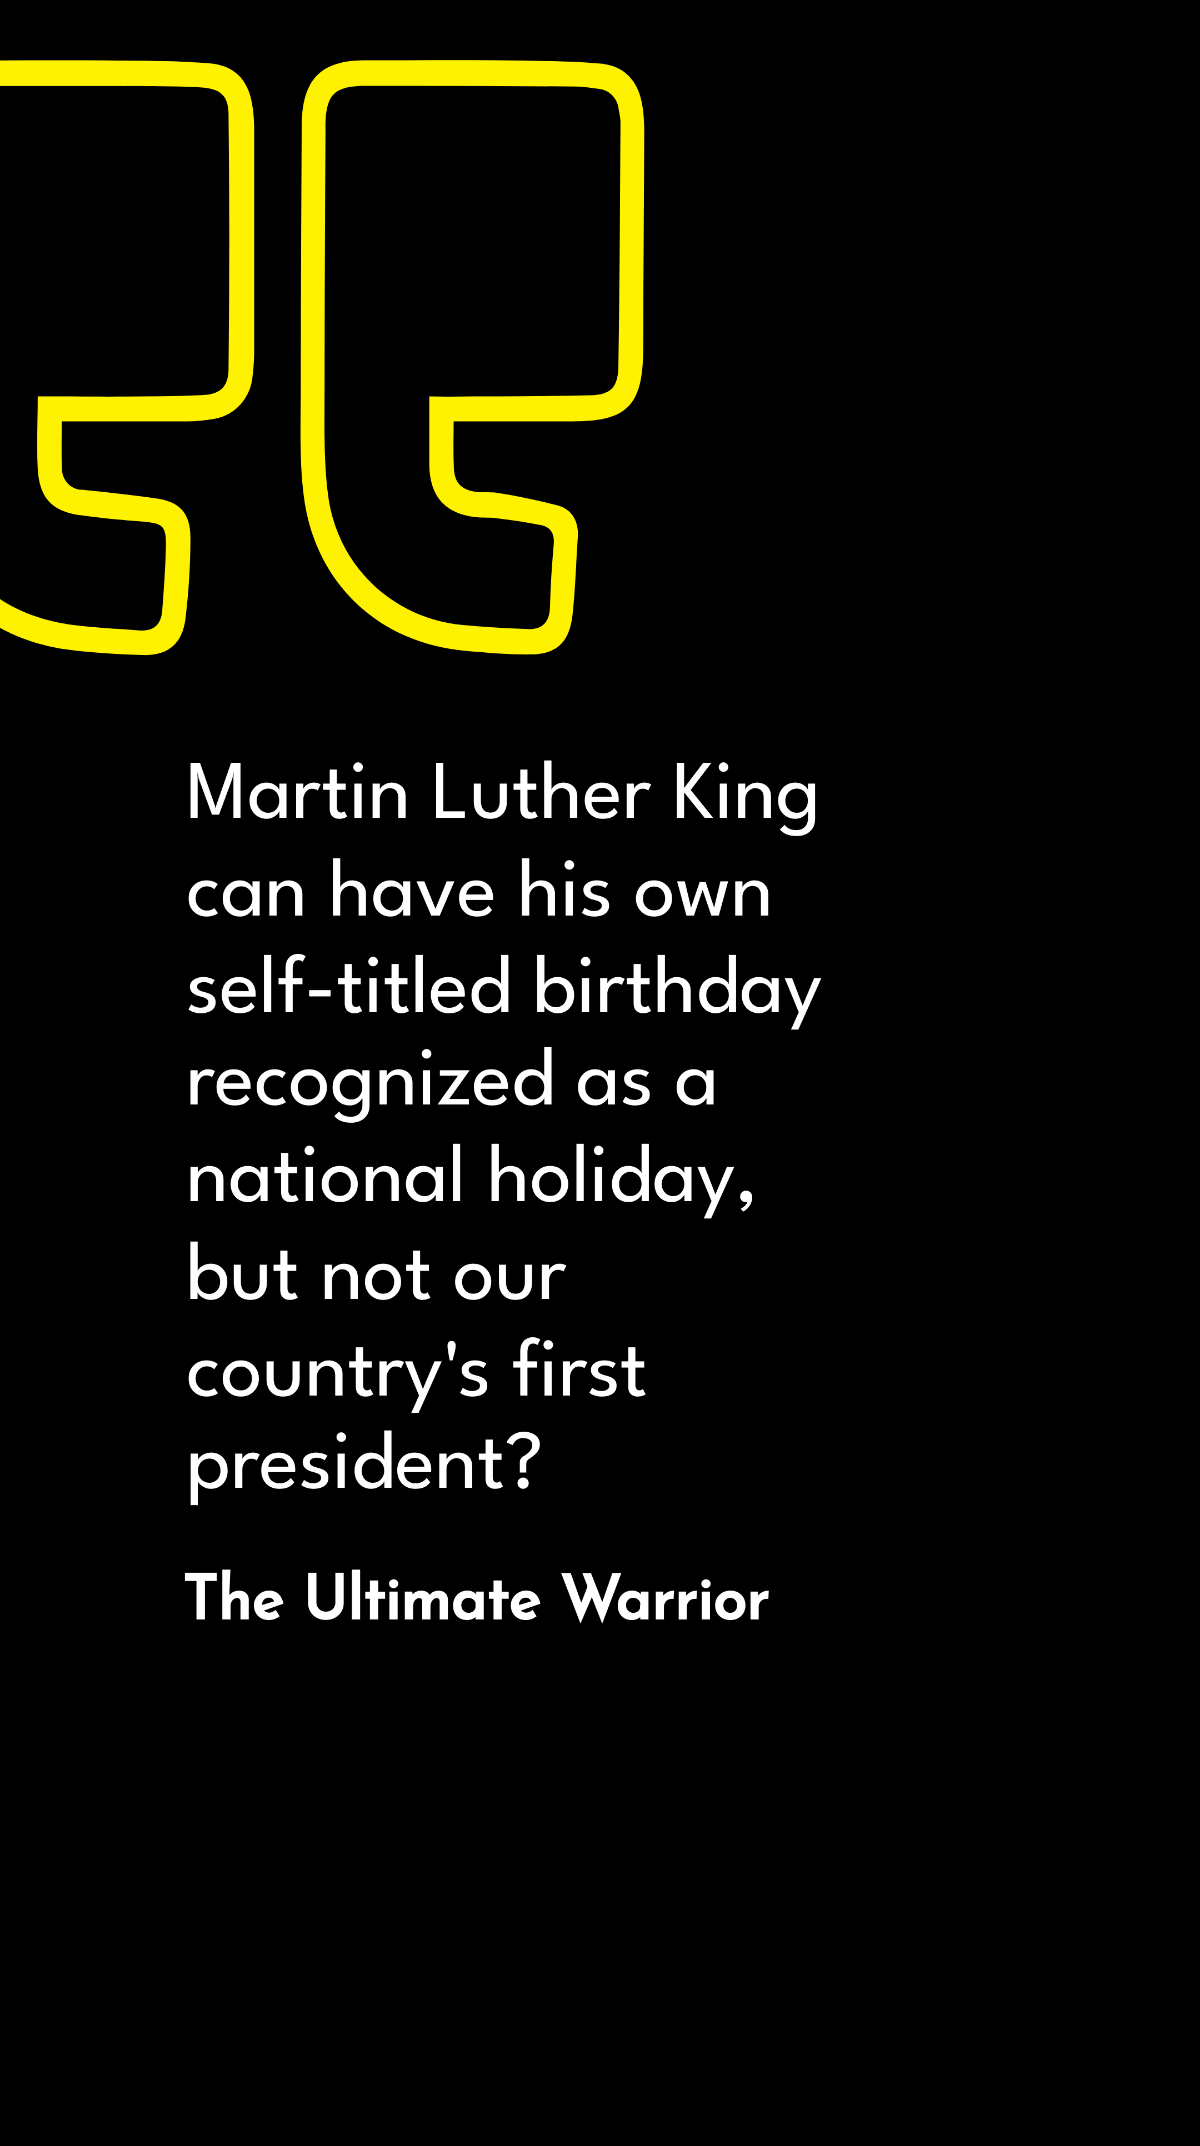 Free The Ultimate Warrior - Martin Luther King can have his own self-titled birthday recognized as a national holiday, but not our country's first president? Template